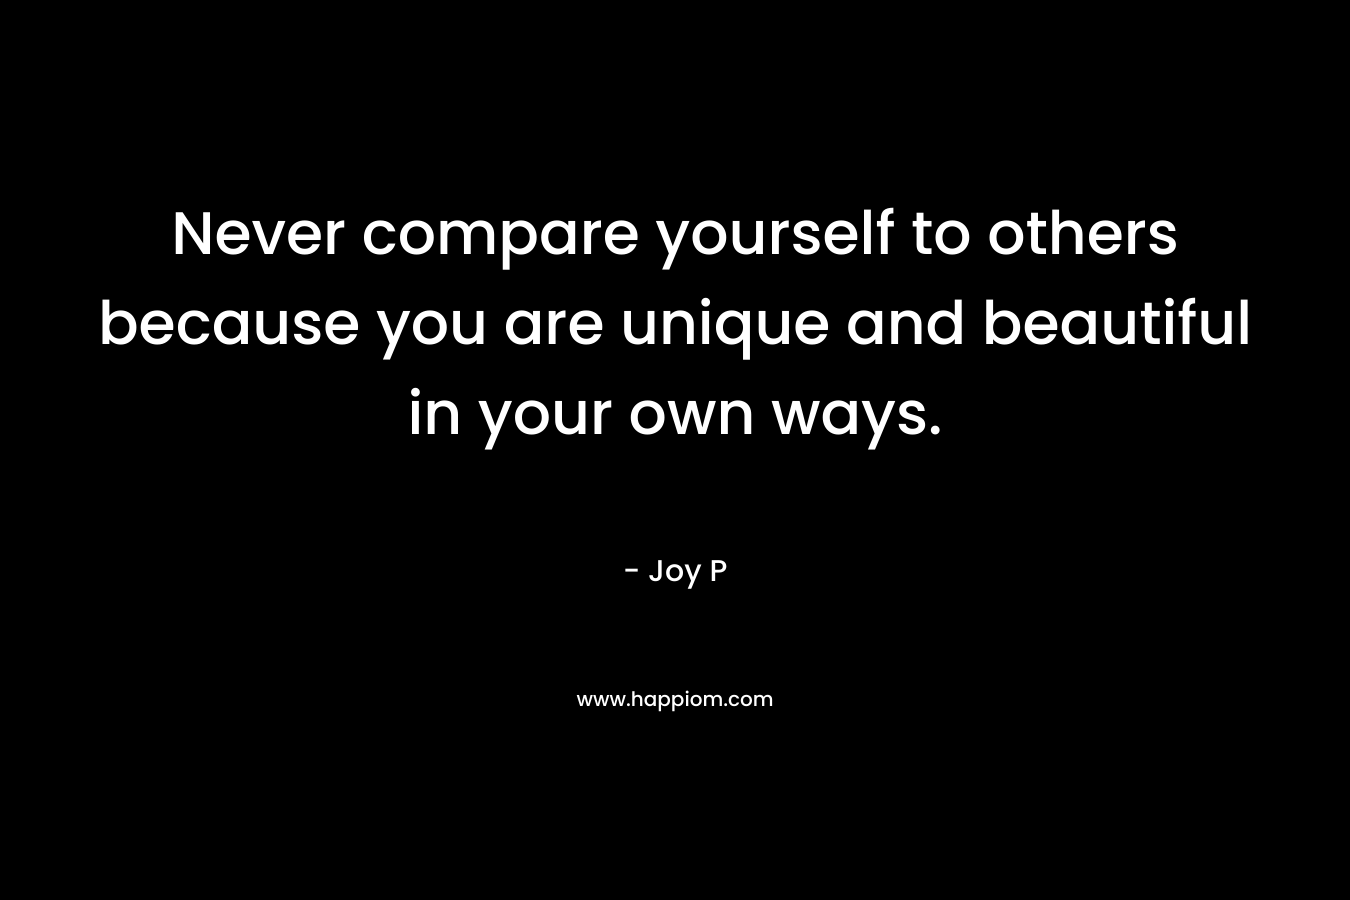 Never compare yourself to others because you are unique and beautiful in your own ways.